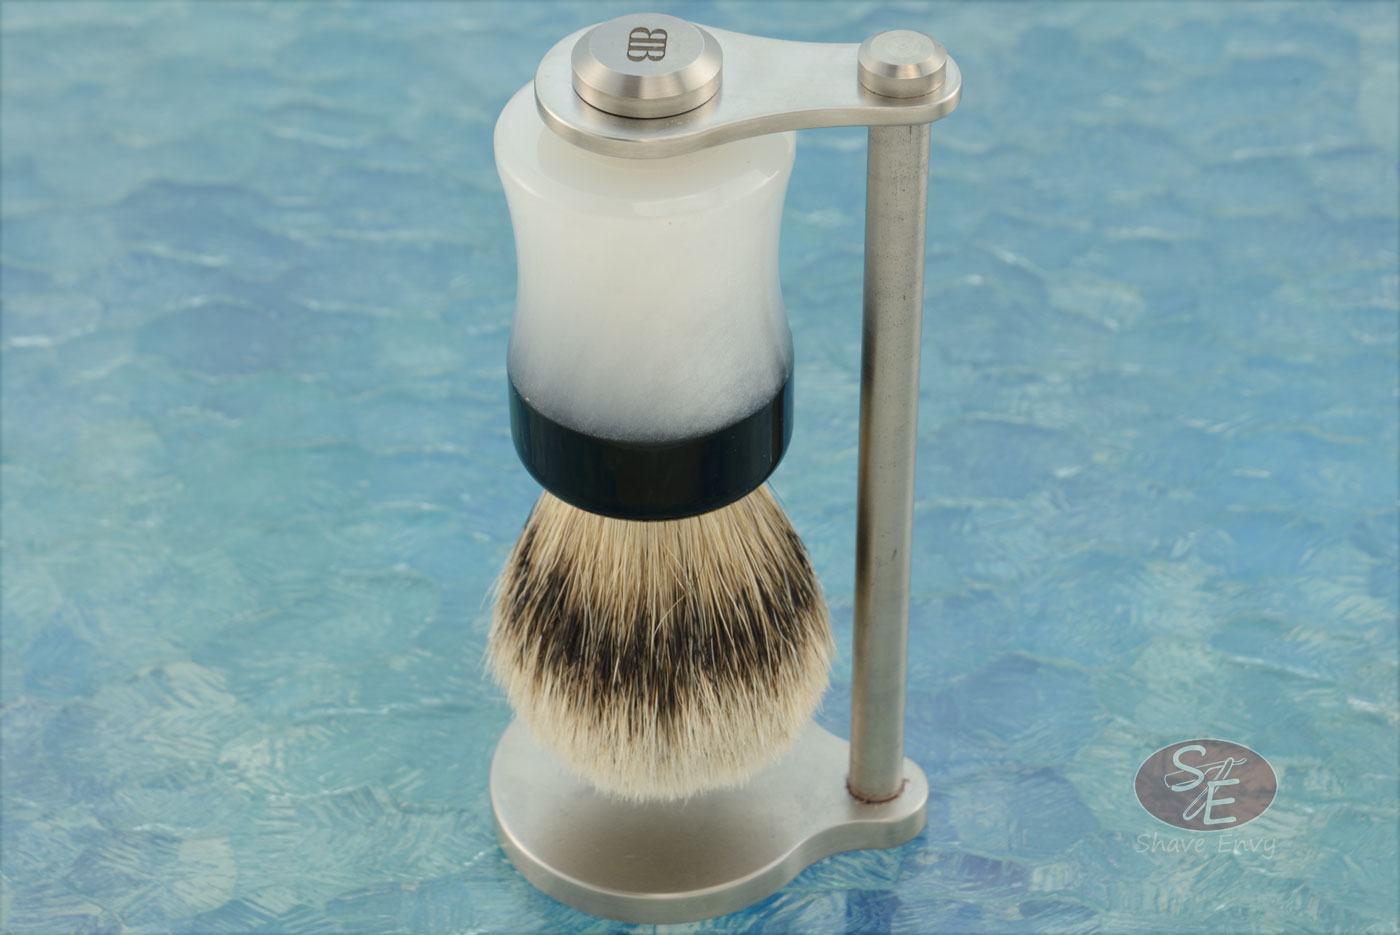 Silvertip Shaving Brush with Magnetic Stand - Acrylic (24mm Knot)